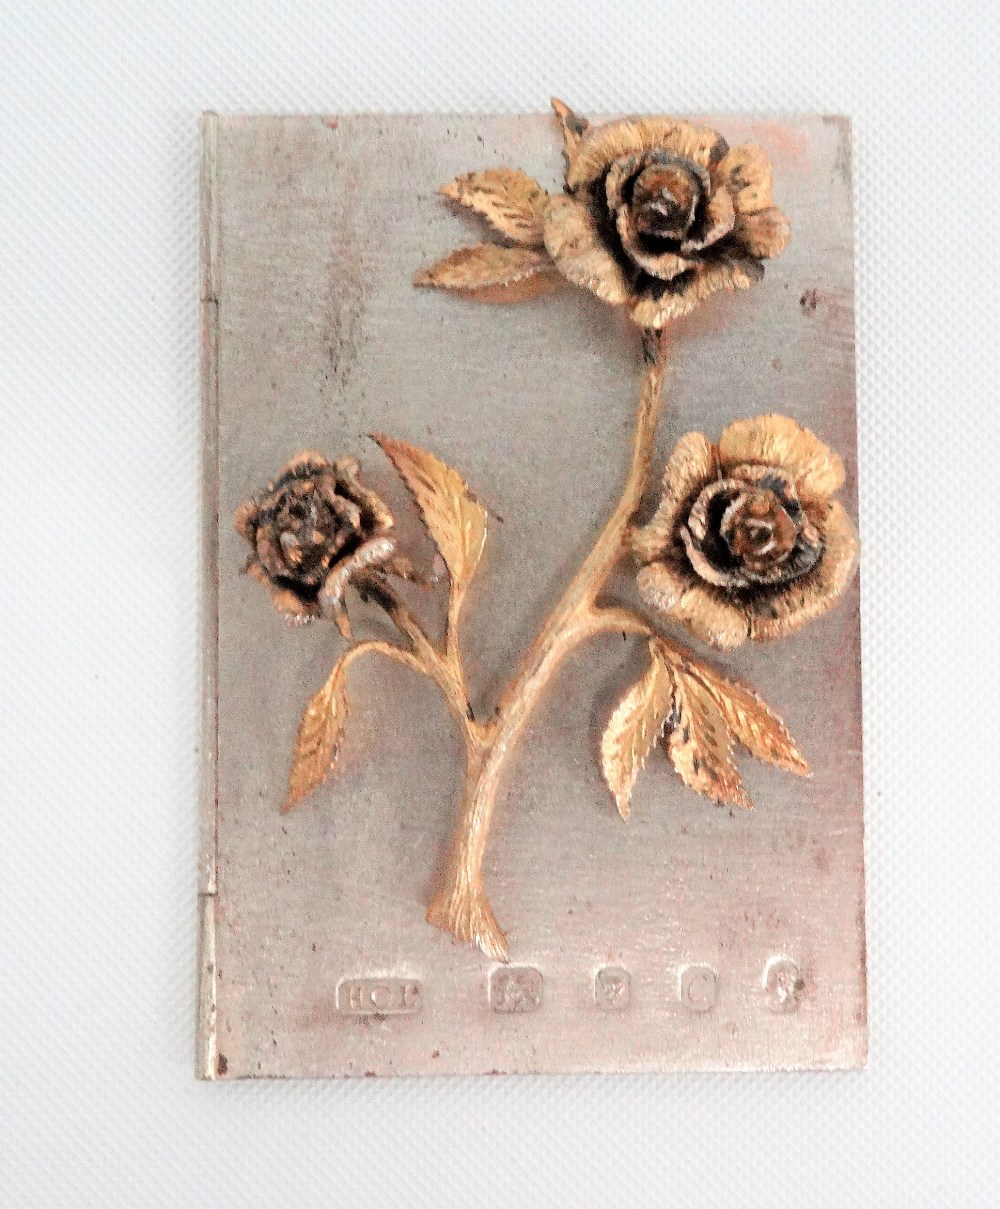 Contemporary silver and silver gilt hinged 'card', the front with applied cast and chased three